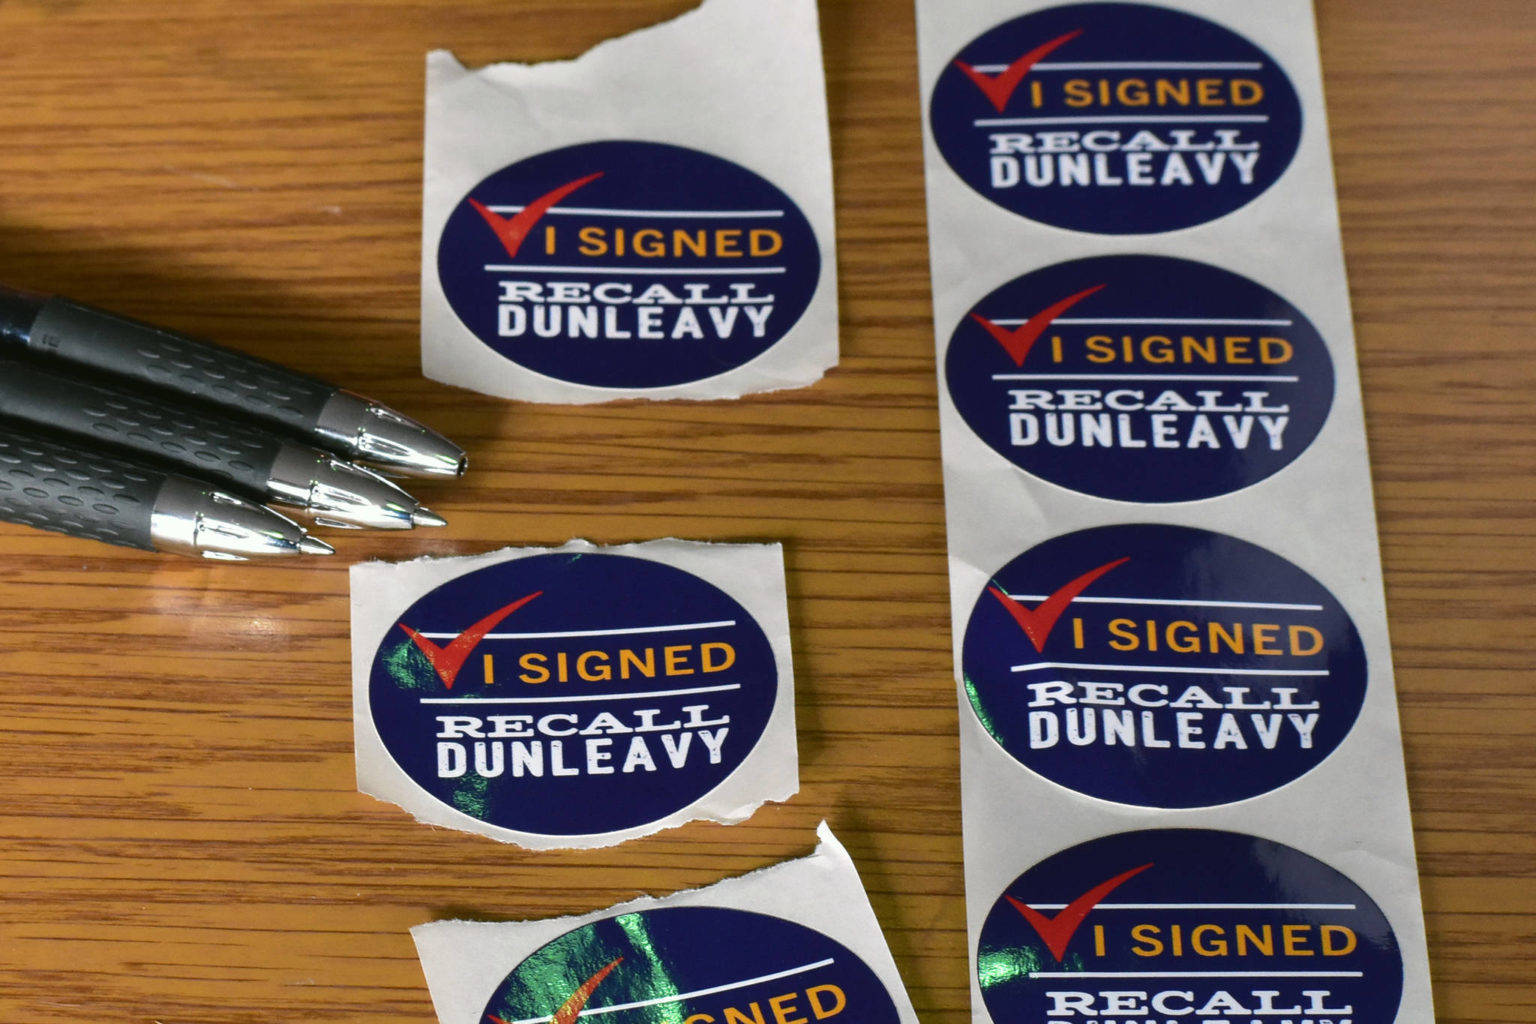 Recall Dunleavy to launch mail-in signature drive